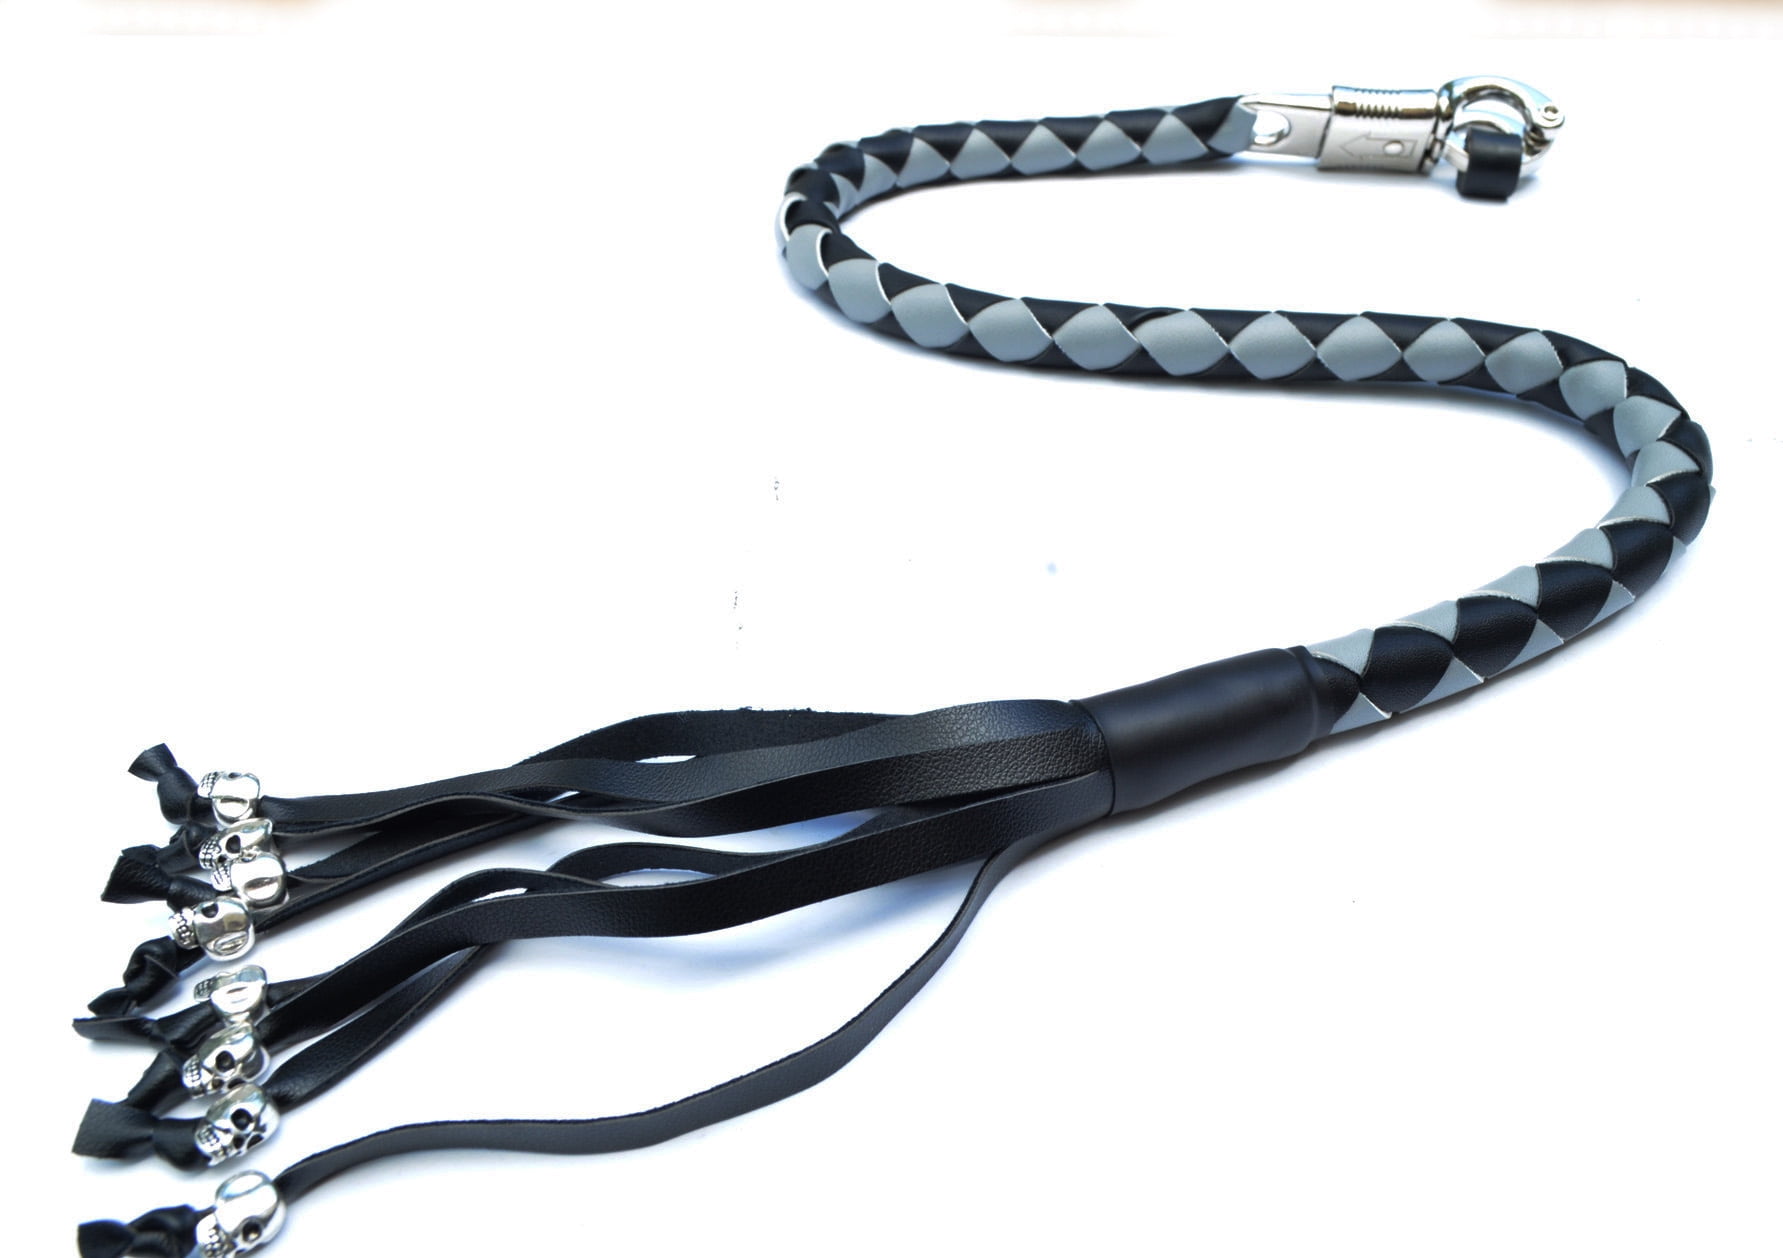 PU Leather Motorcycle Whip Get Back whip with Skull Tassels 36" GRAY